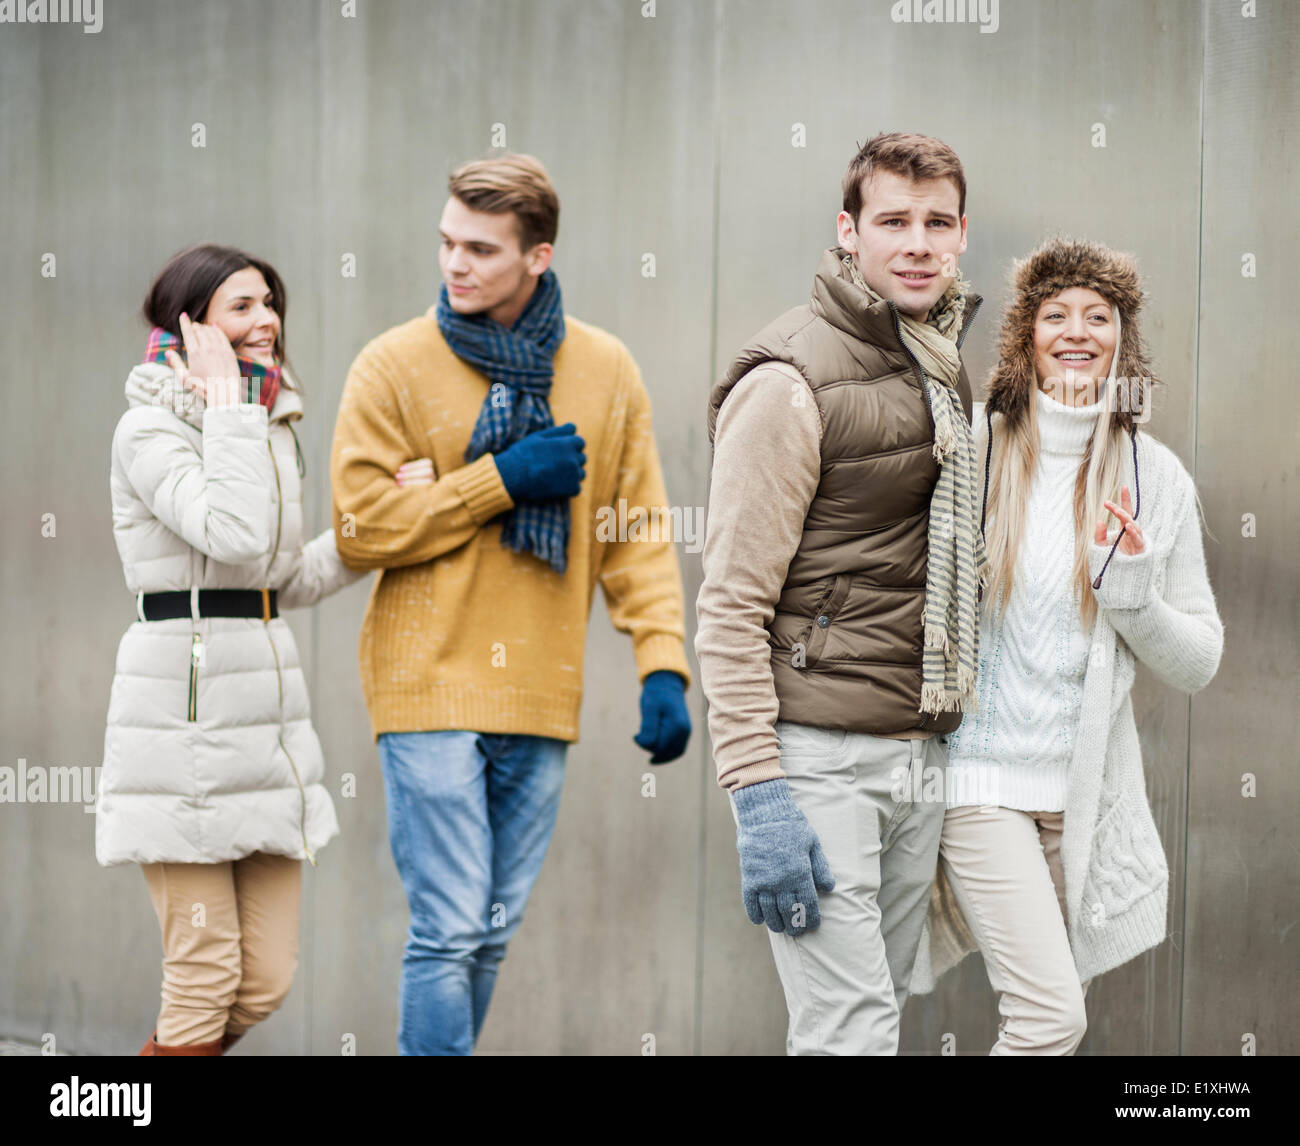 Smiling young couples walking against wall Banque D'Images